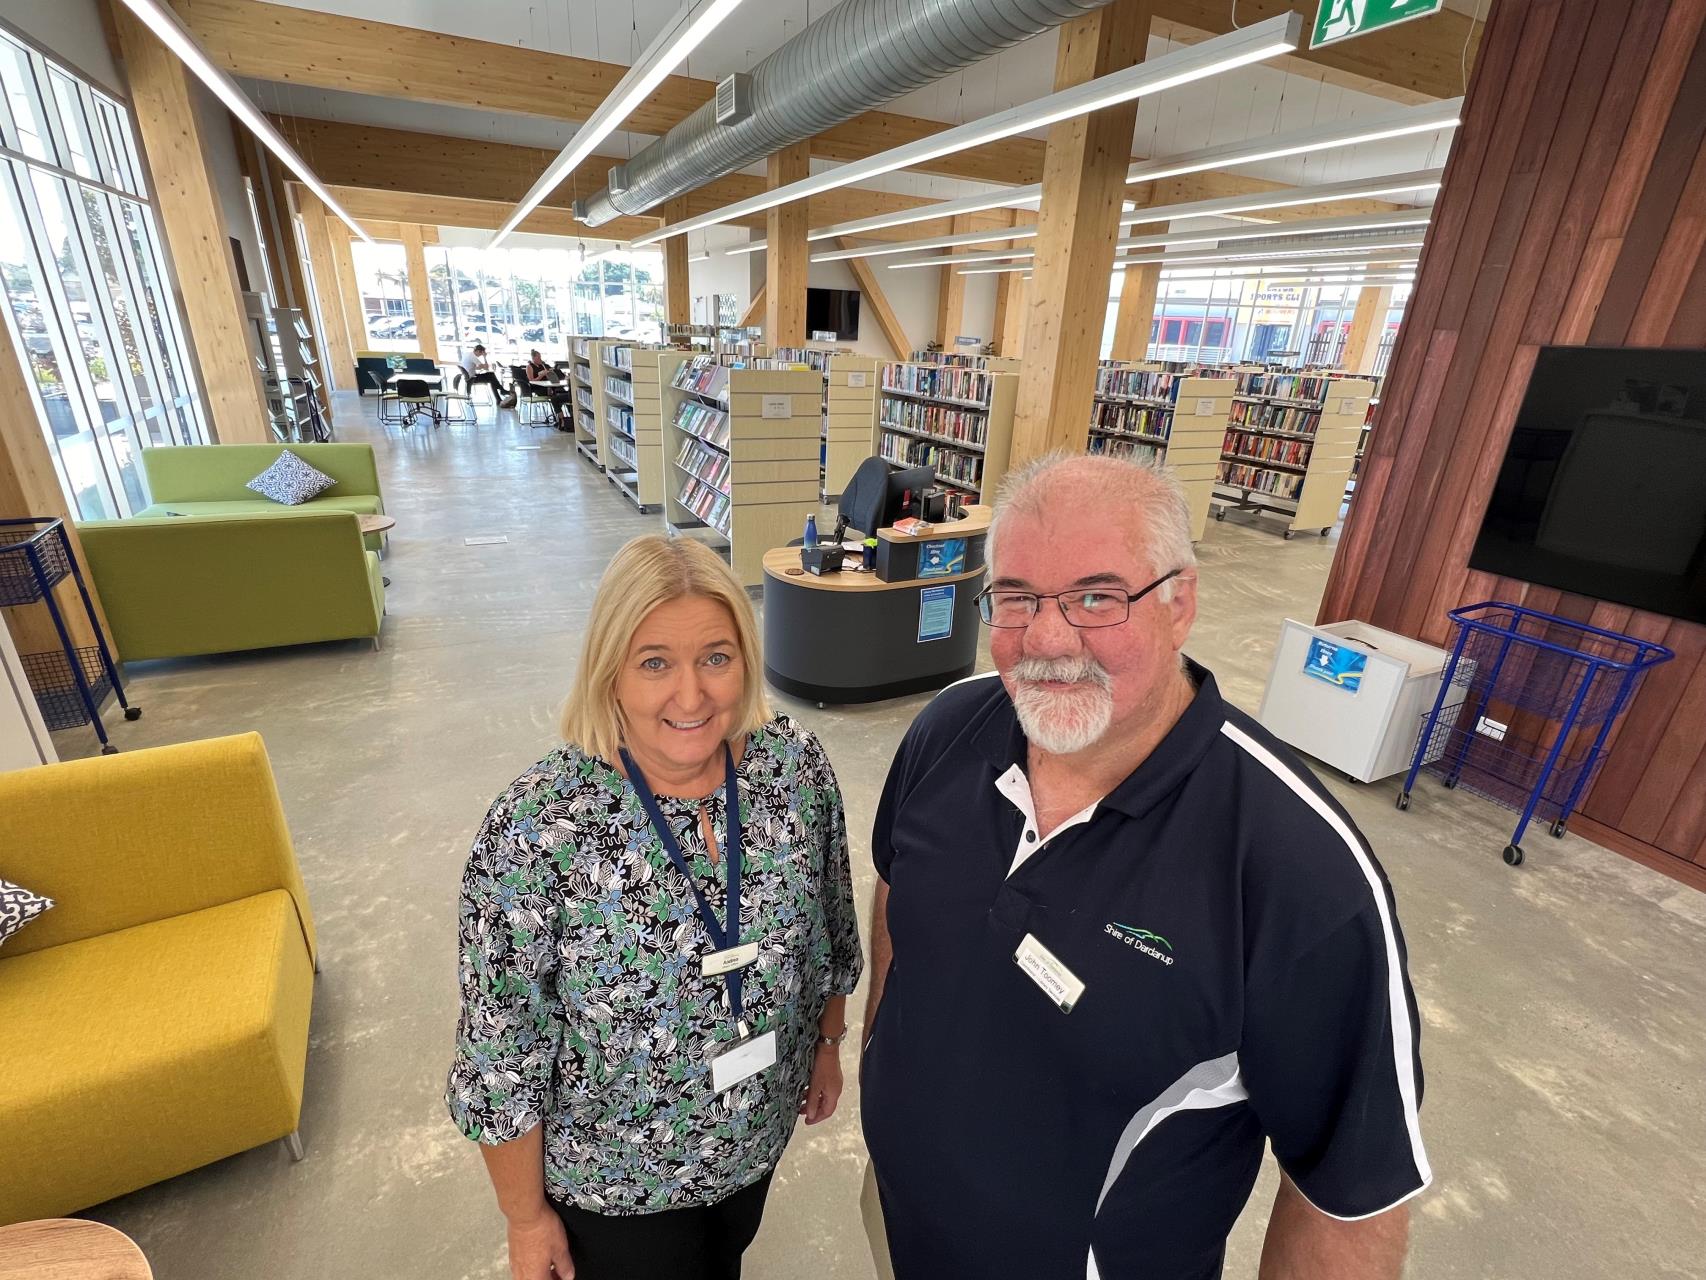 Library opens its doors today at new location